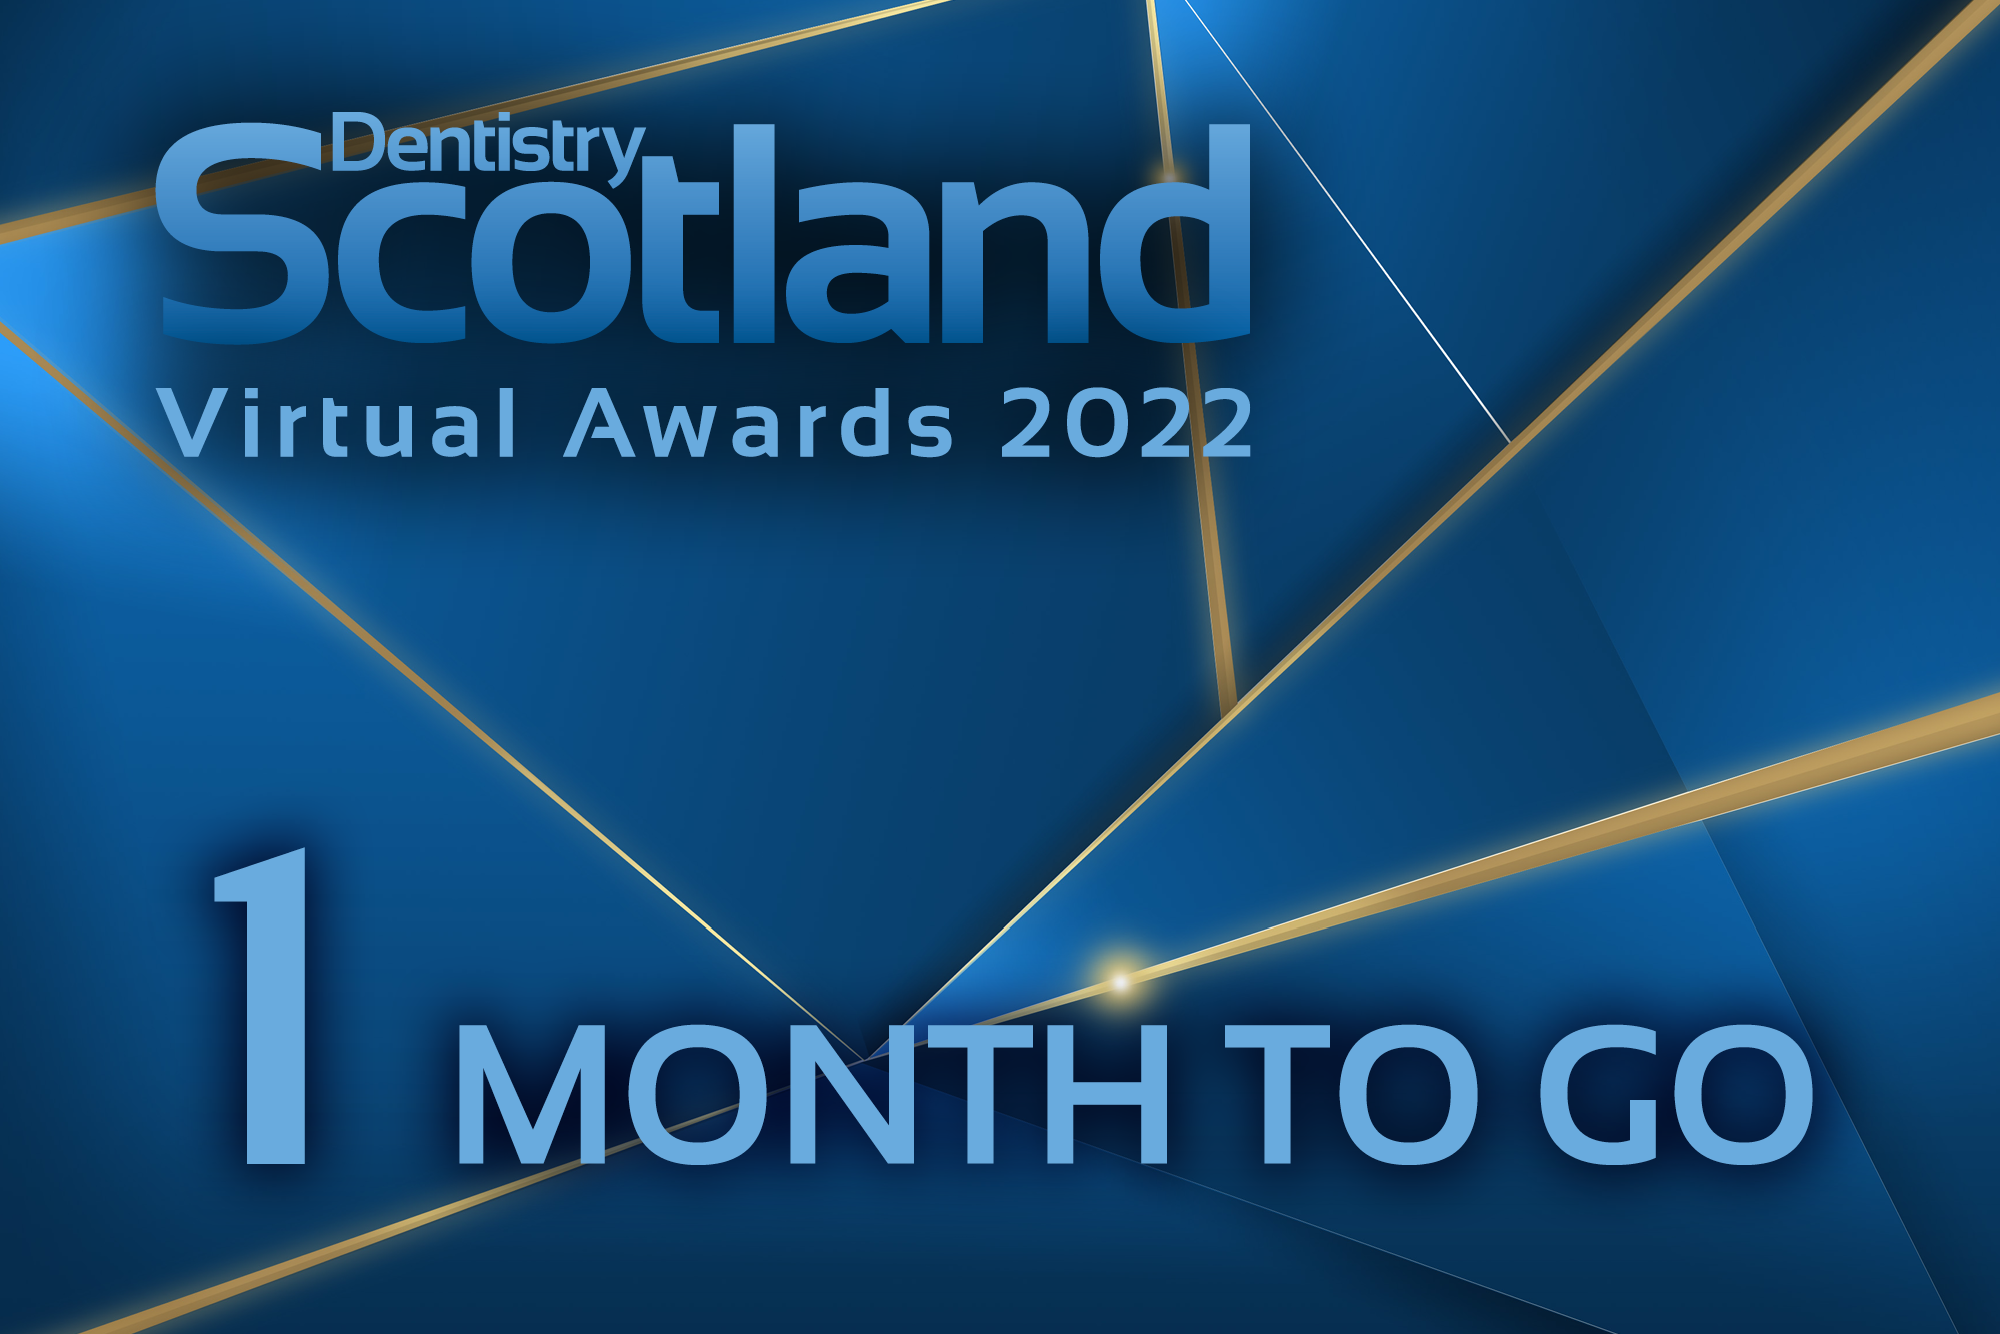 With only one month to go until the deadline, don't miss out onentering into the Dentistry Scotland Awards!